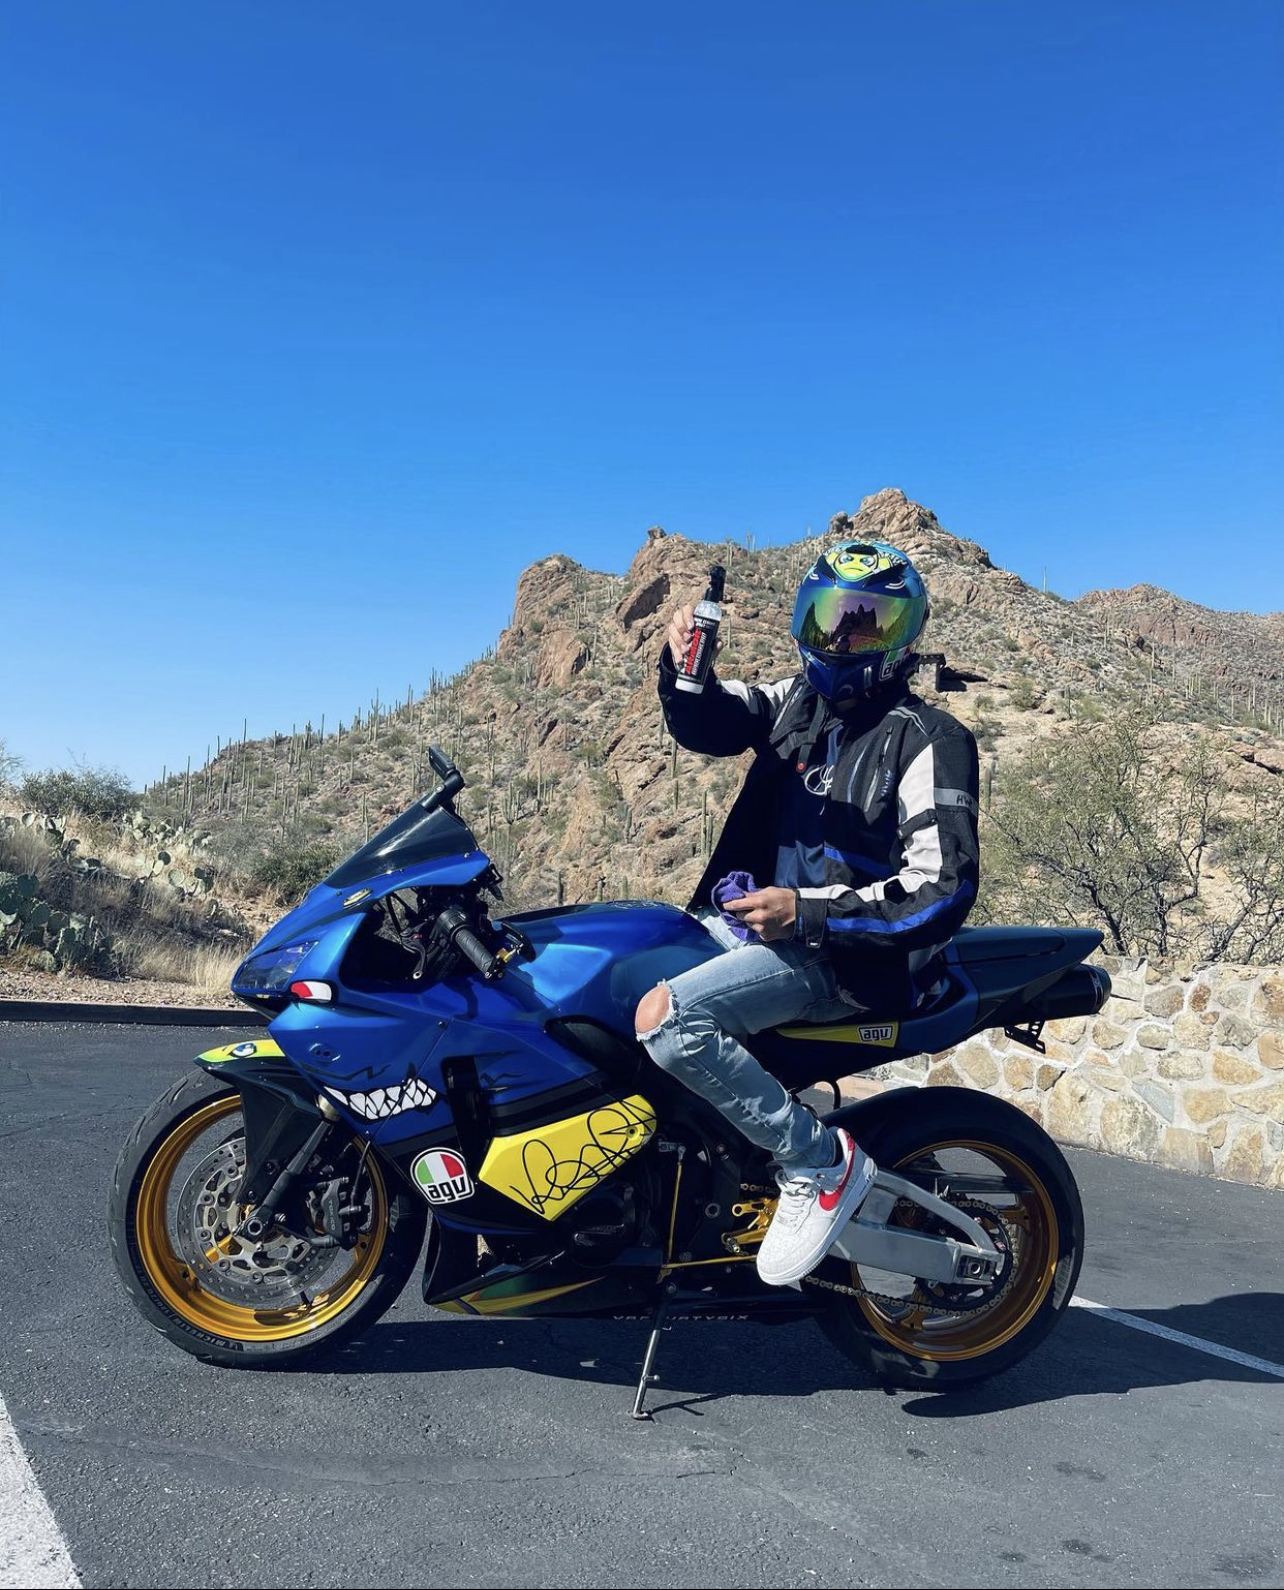 Social Media Influencer Official Yungin Is Back After Recovering From A Lethal Accident While Riding His Shark Street Bike